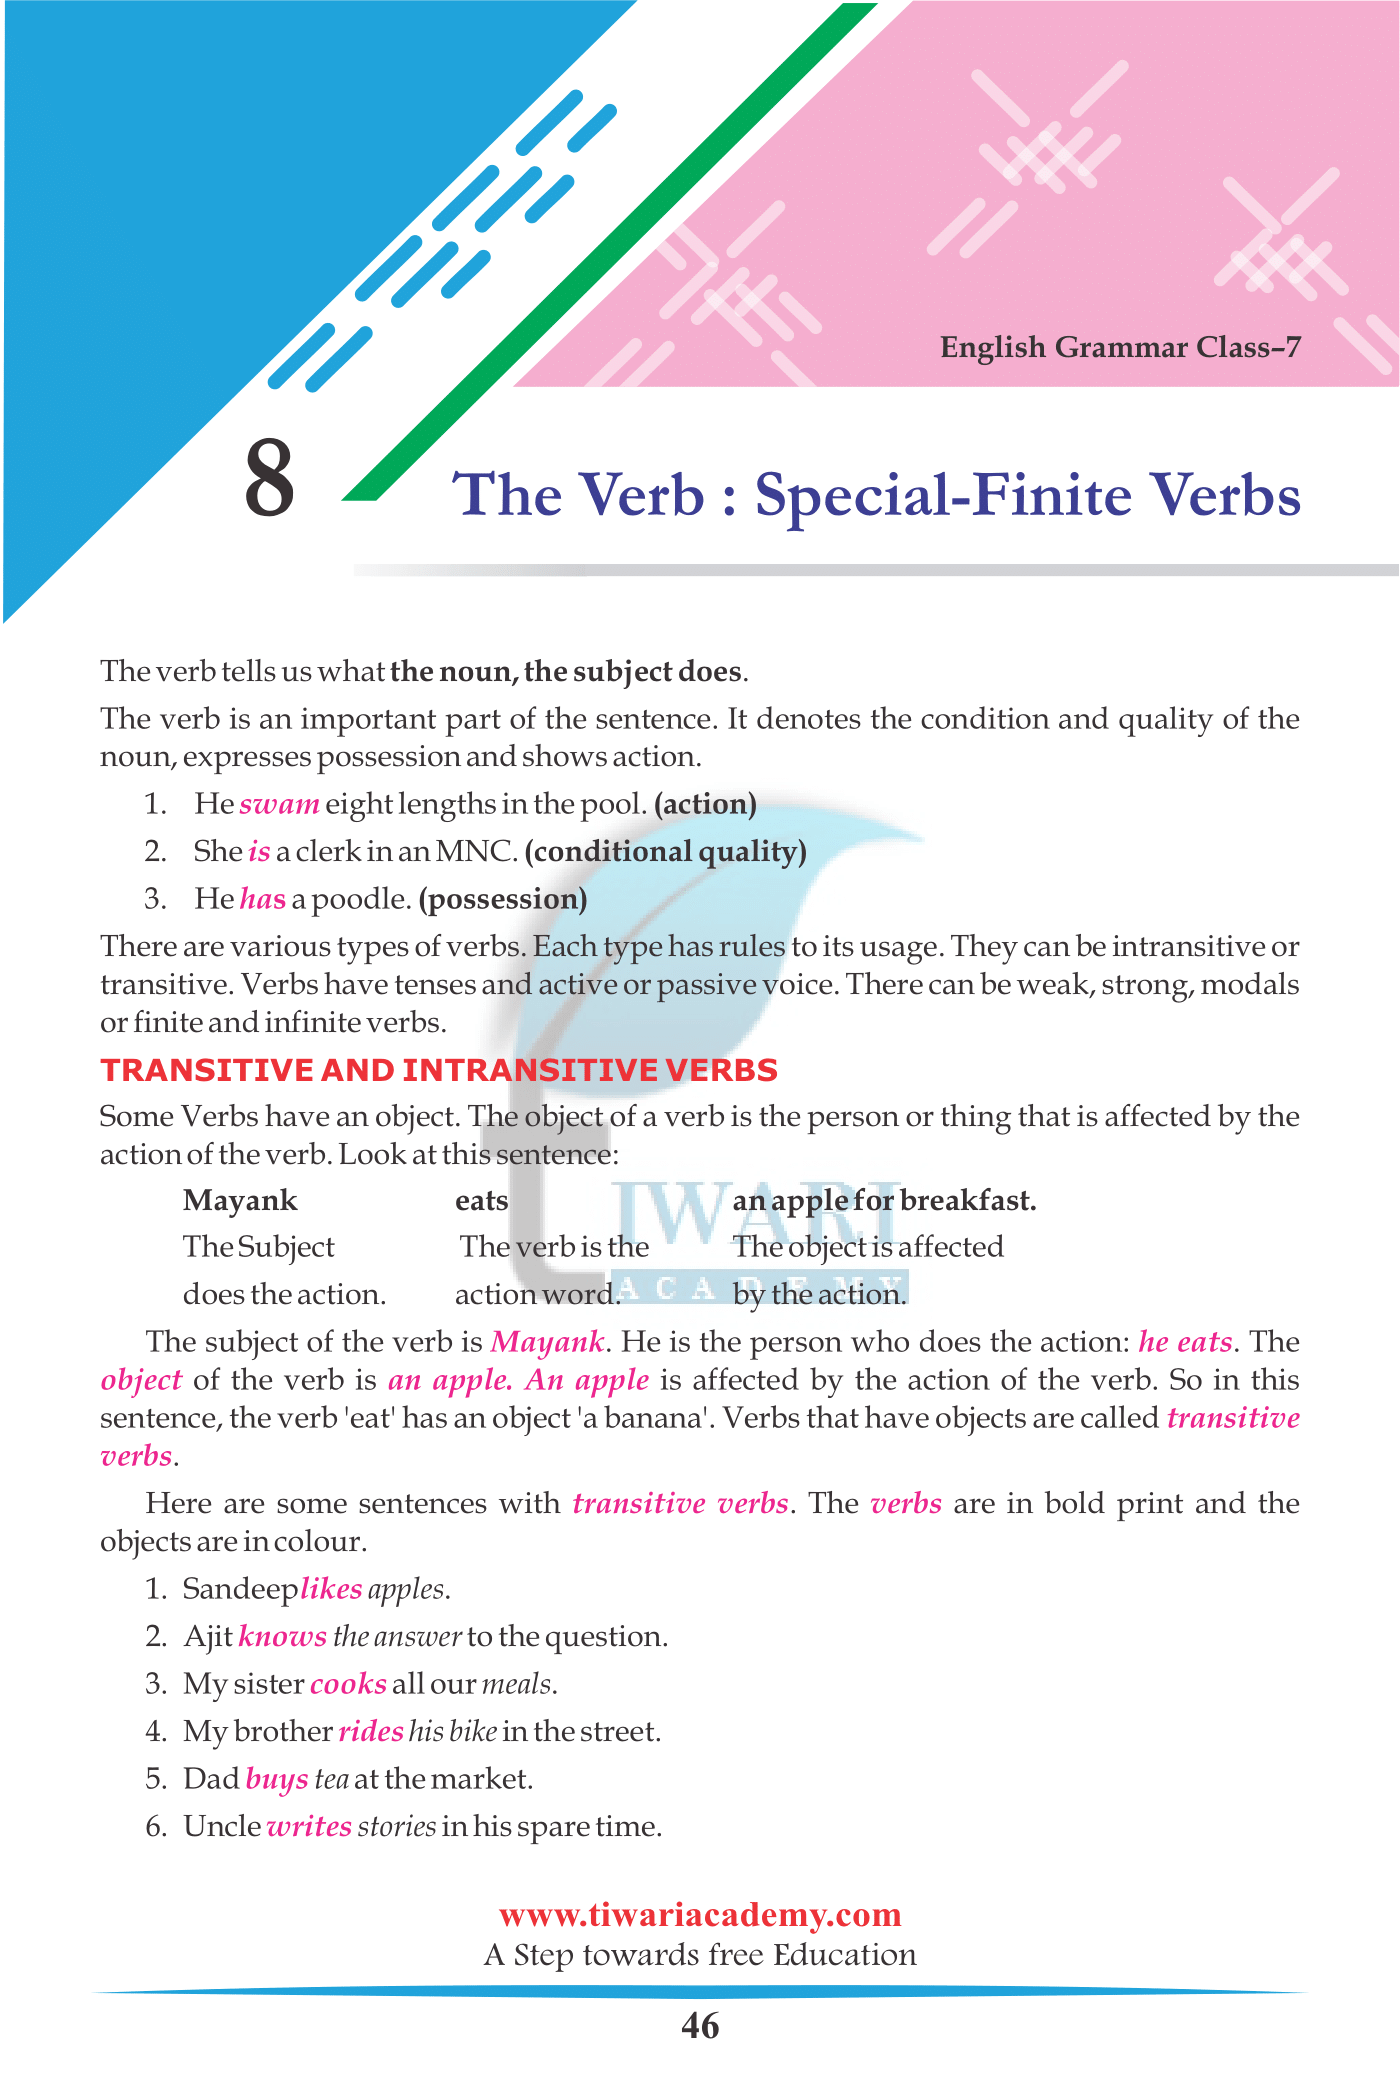 Class 7 English Grammar Chapter 8 The Verb Special Finite Verbs 2022-2023